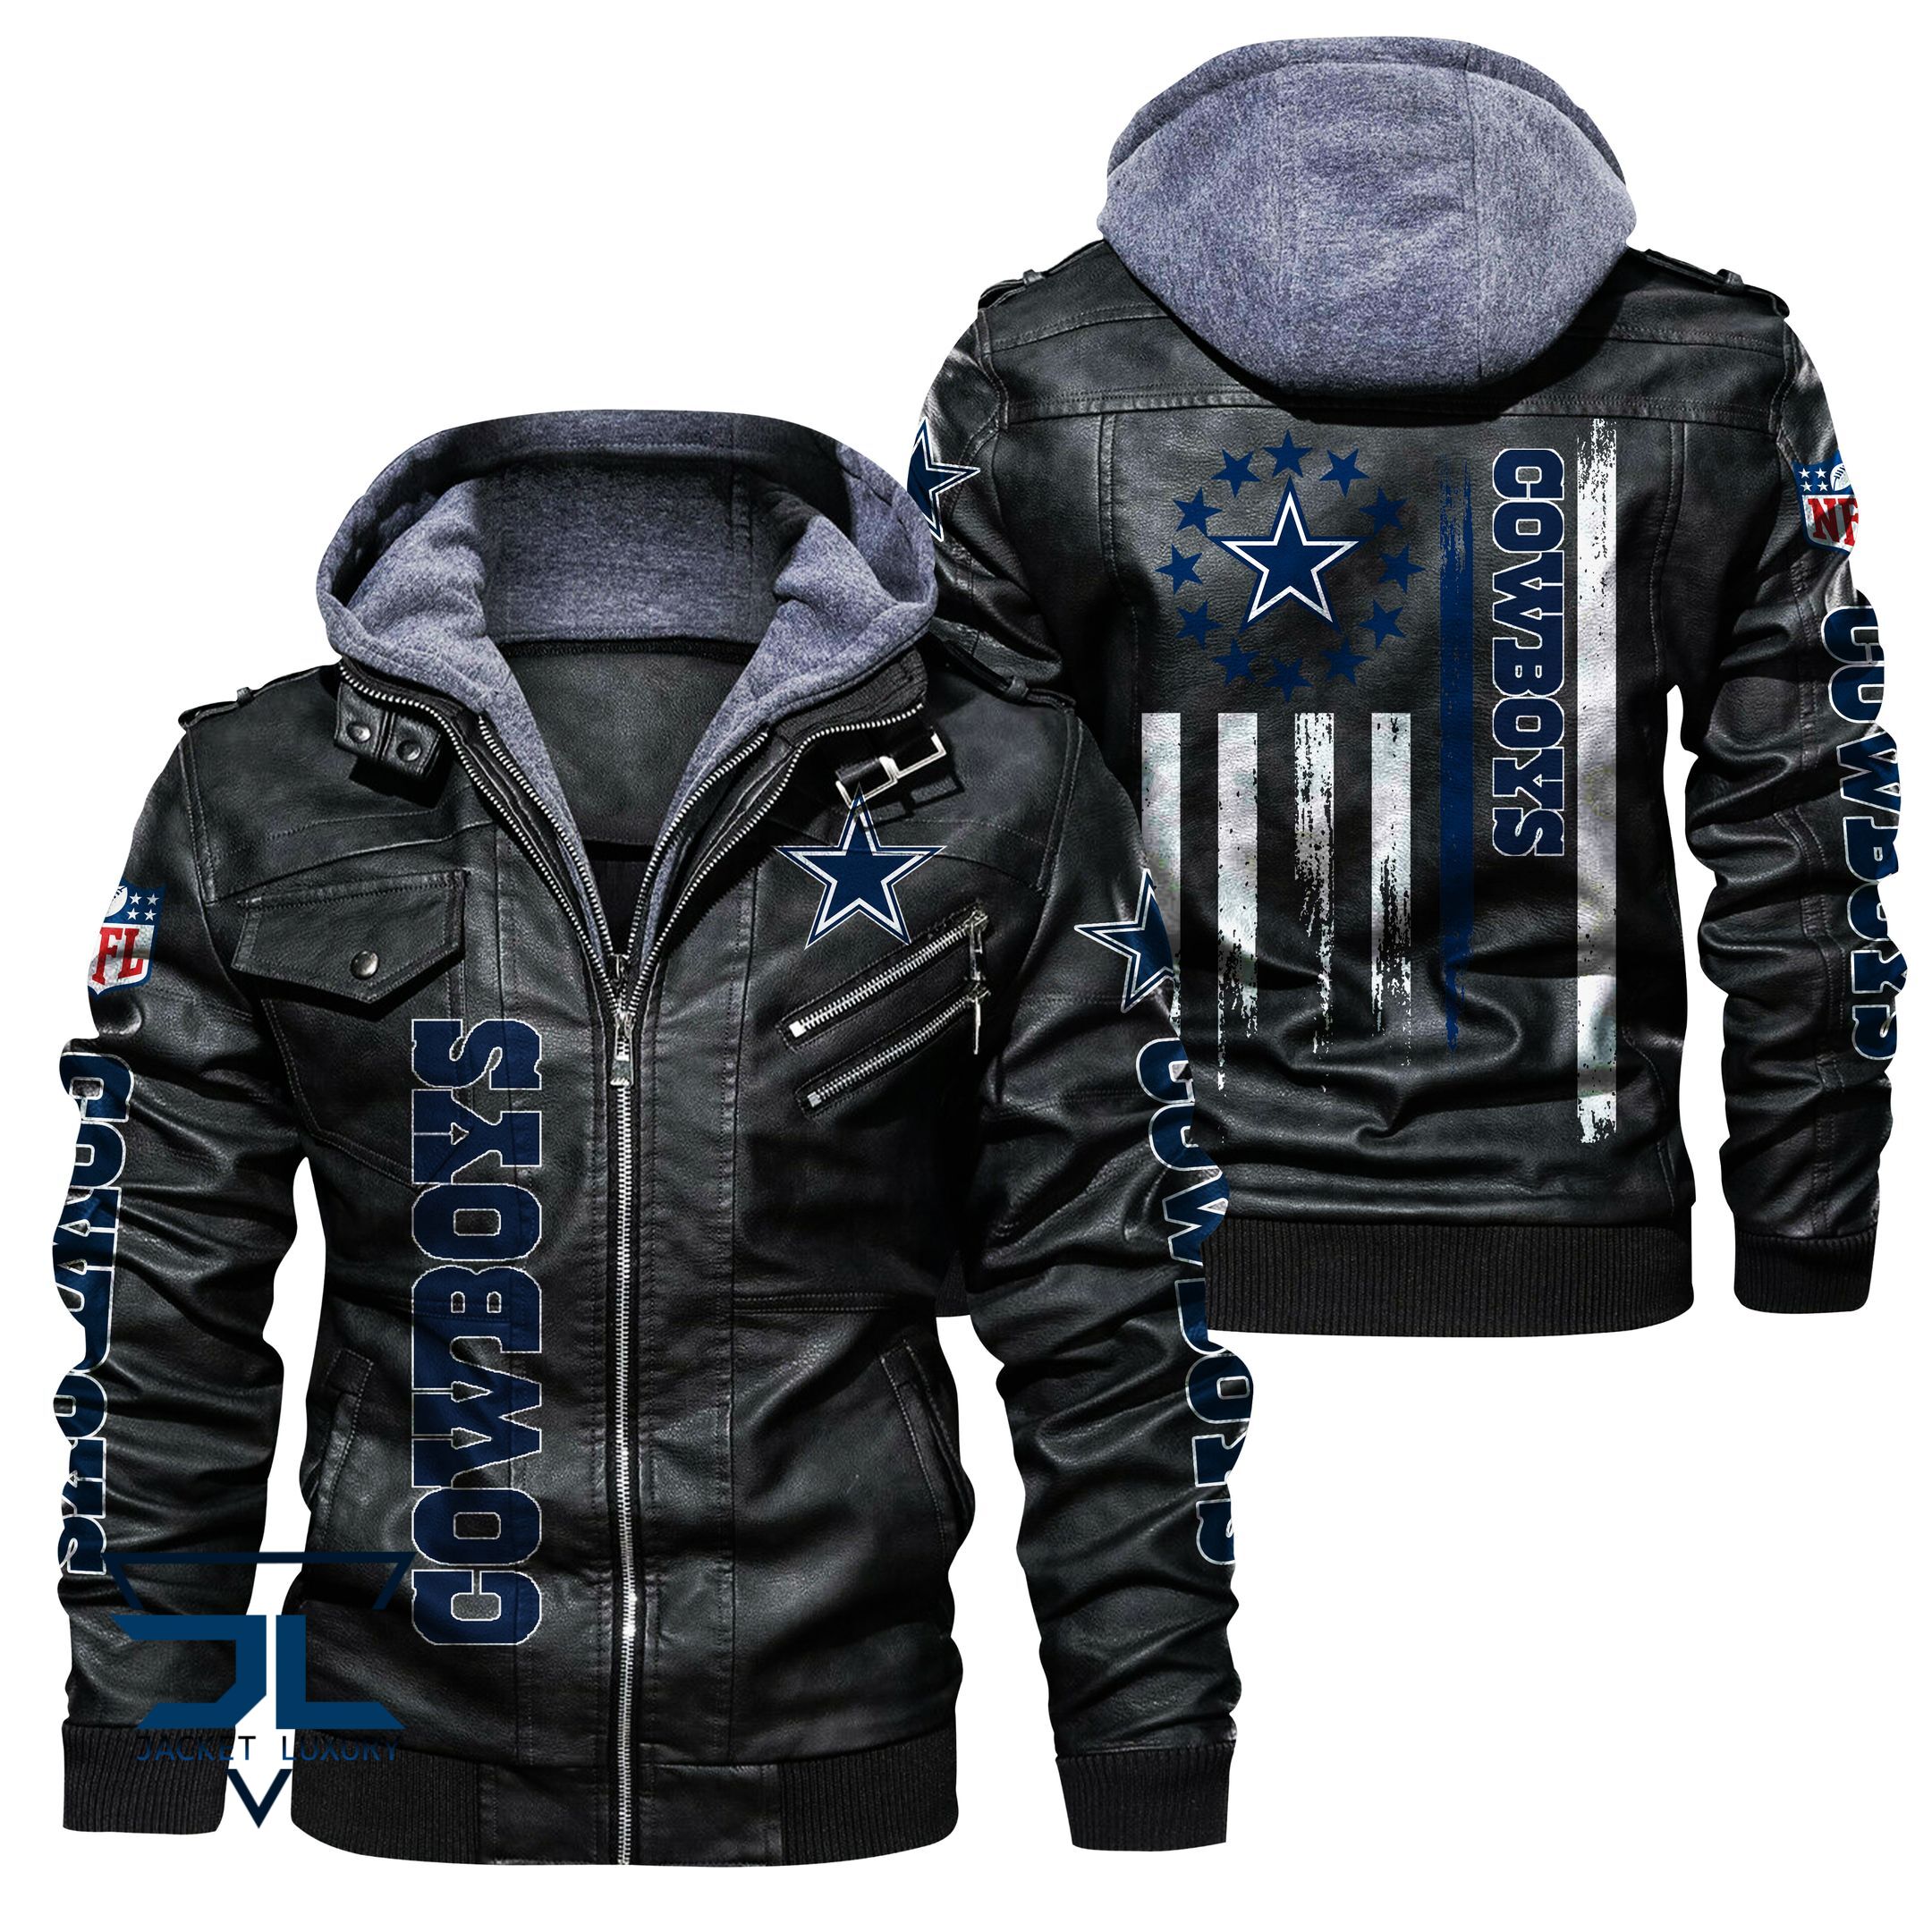 The most popular jacket on Tezostore 311